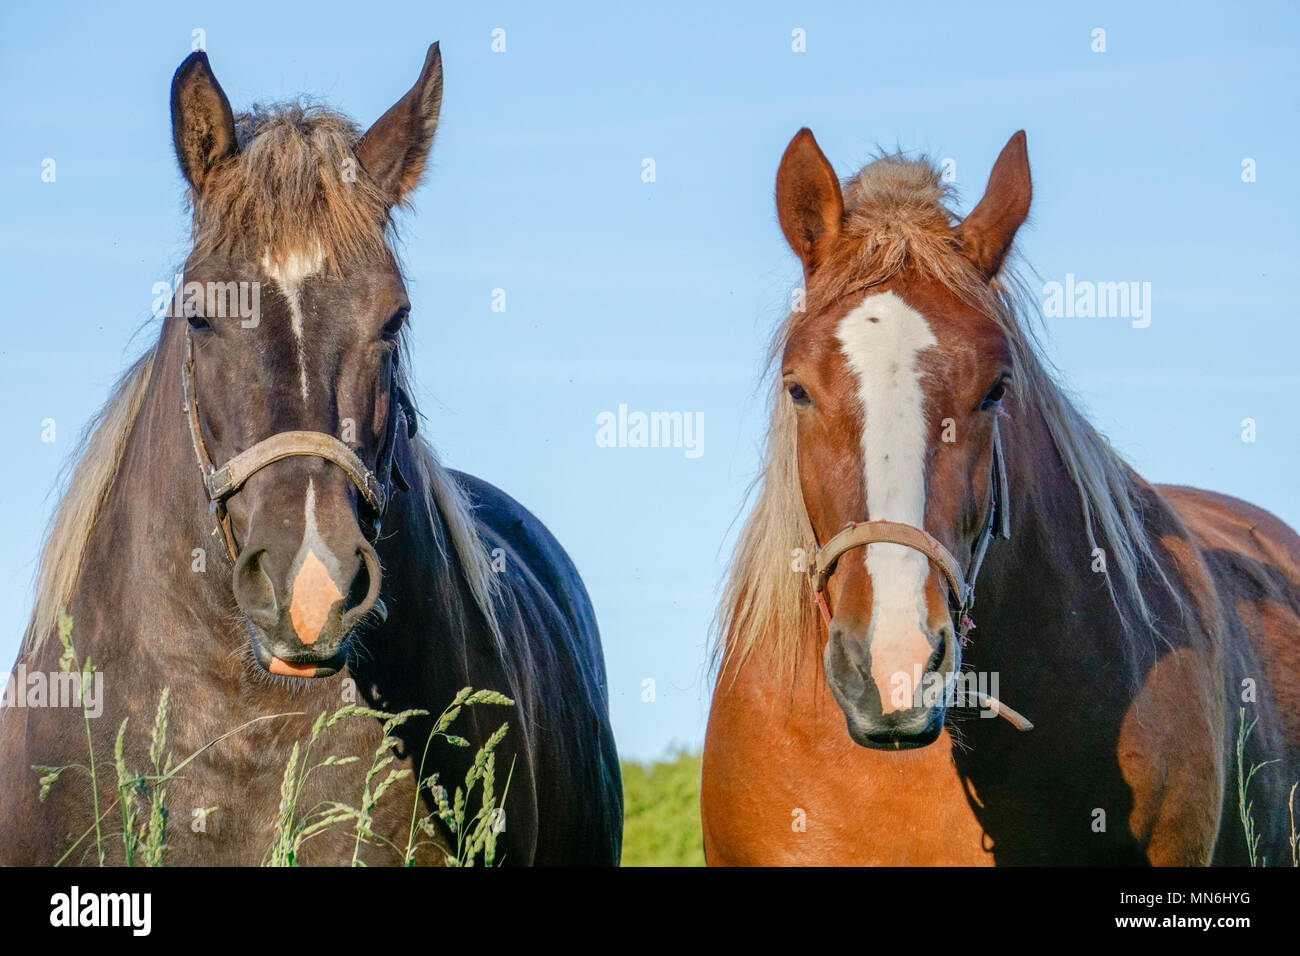 The two horses look Stock Photo